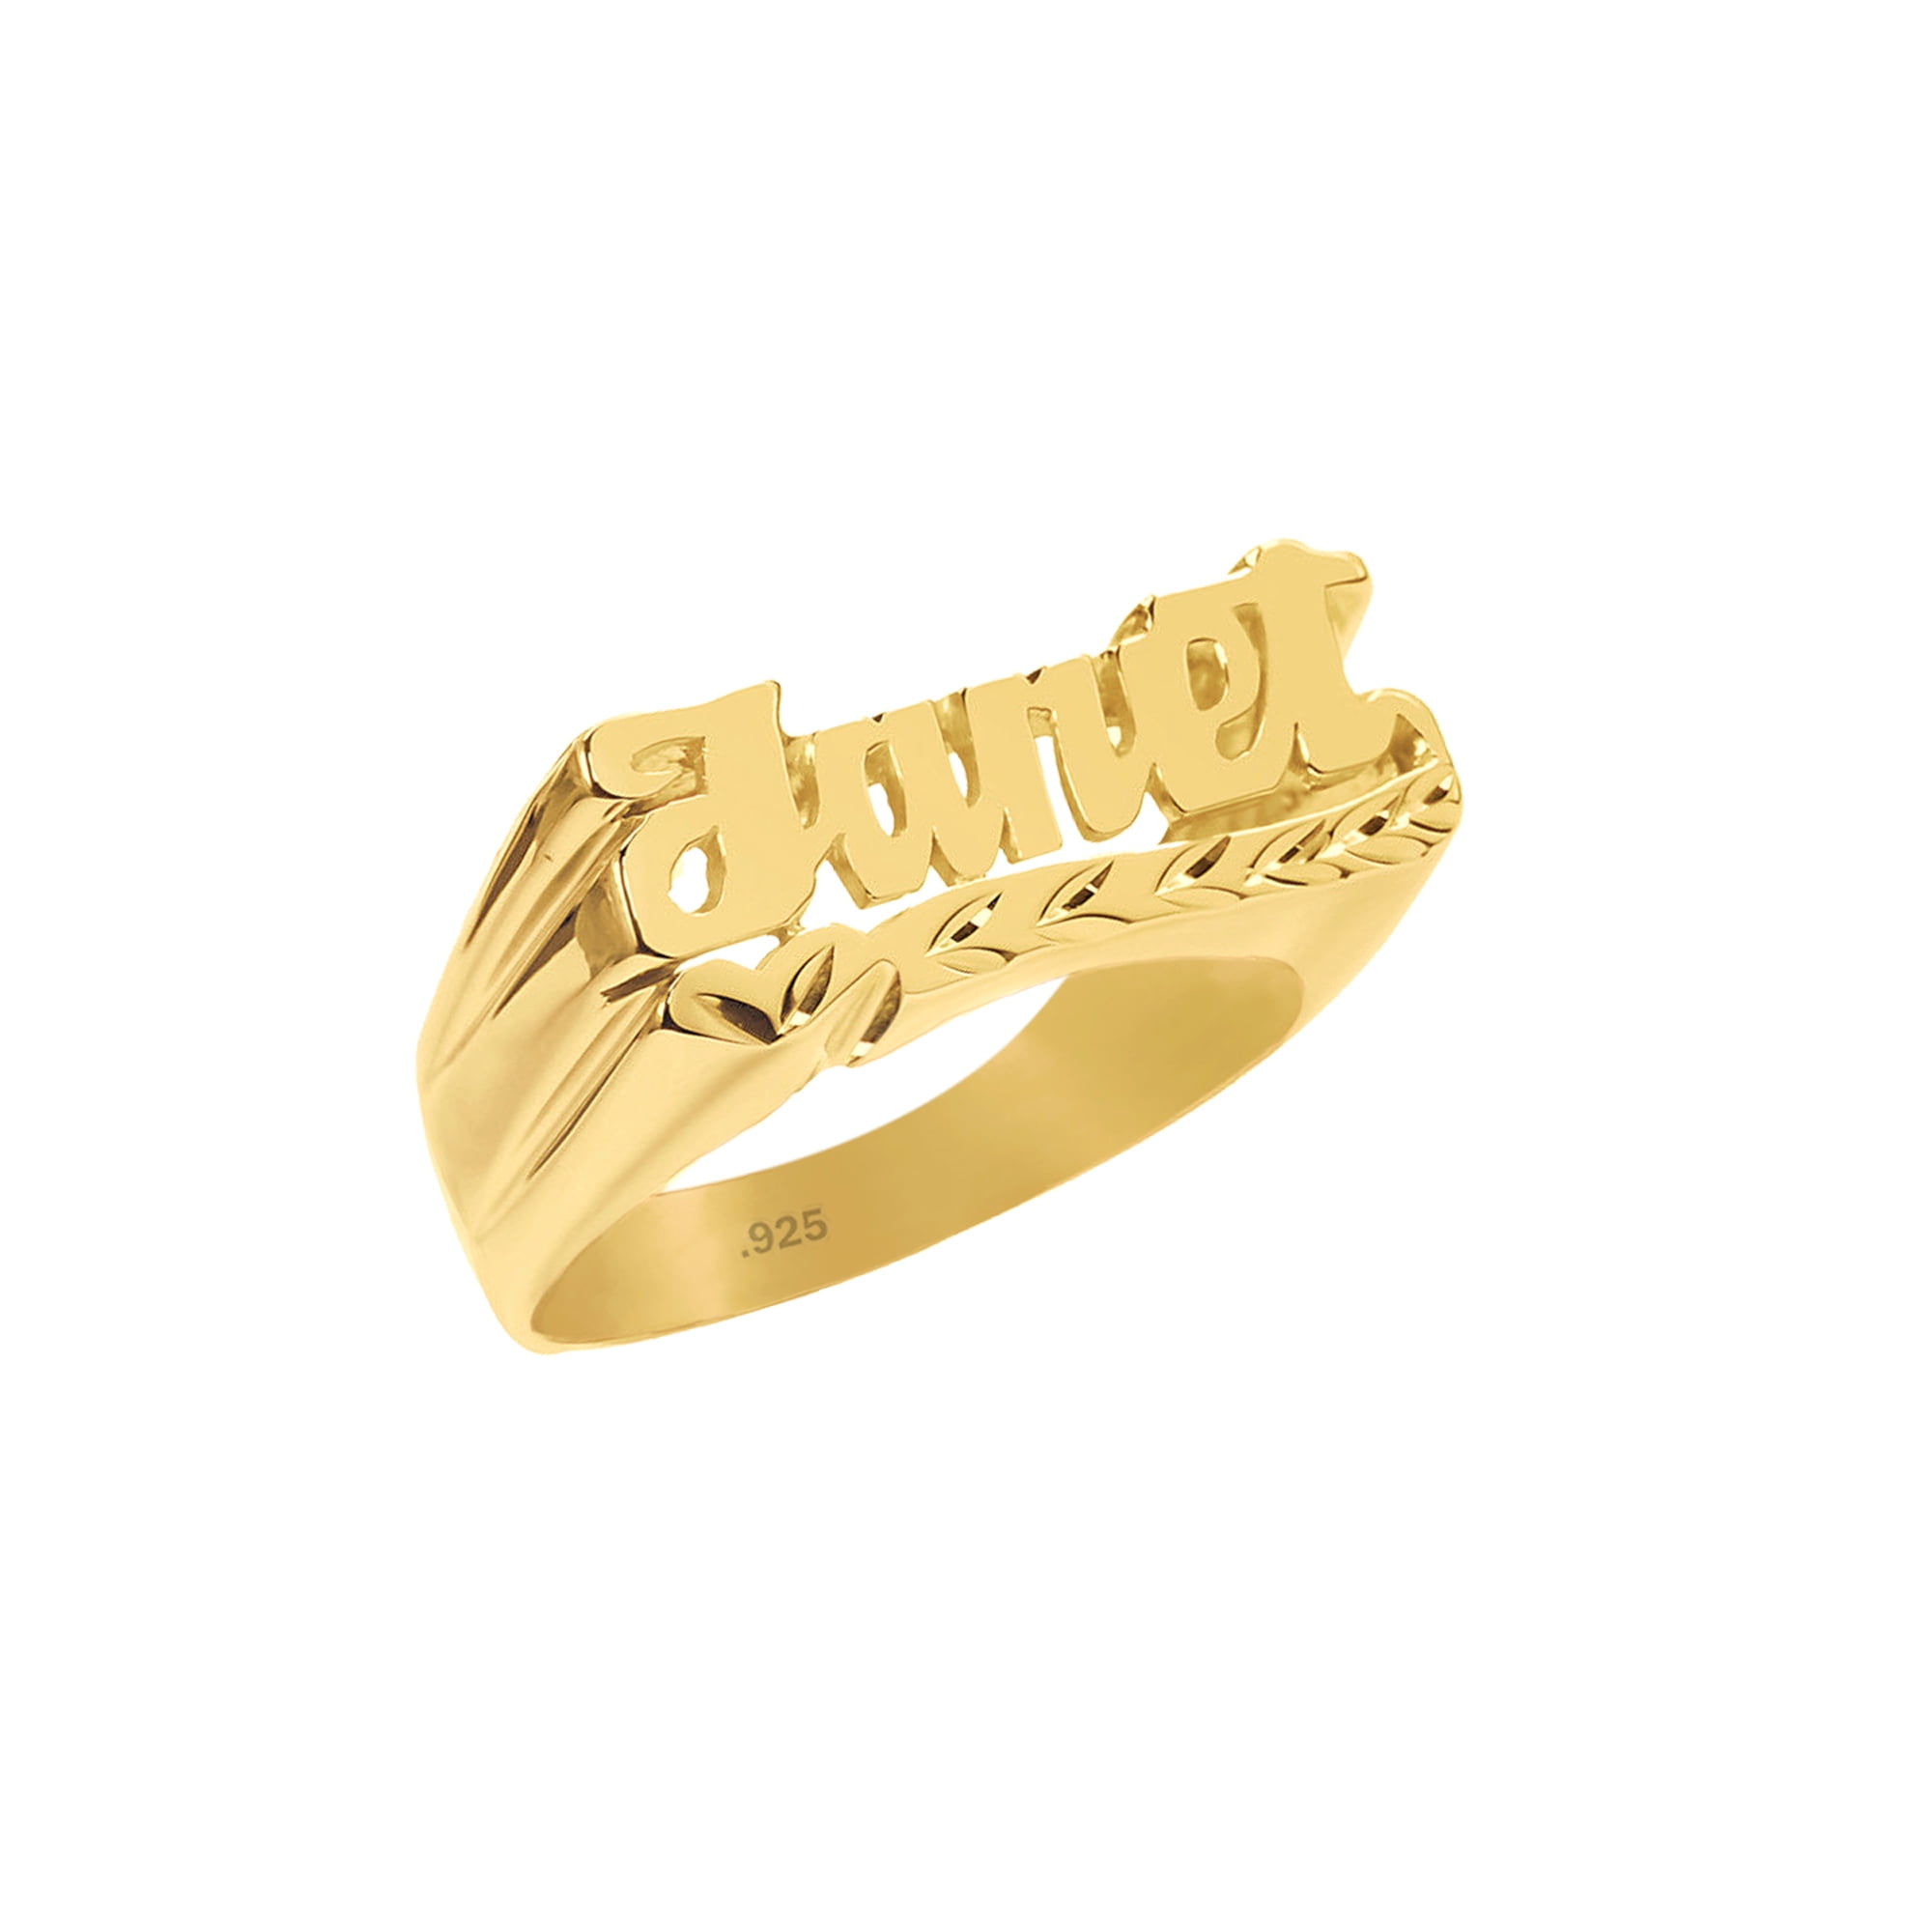 Personalized Customized Single Name Brass Ring With Ur Name Or Love One  Name With 24k Gold Plating And lazer Engraved Finish (Golden)